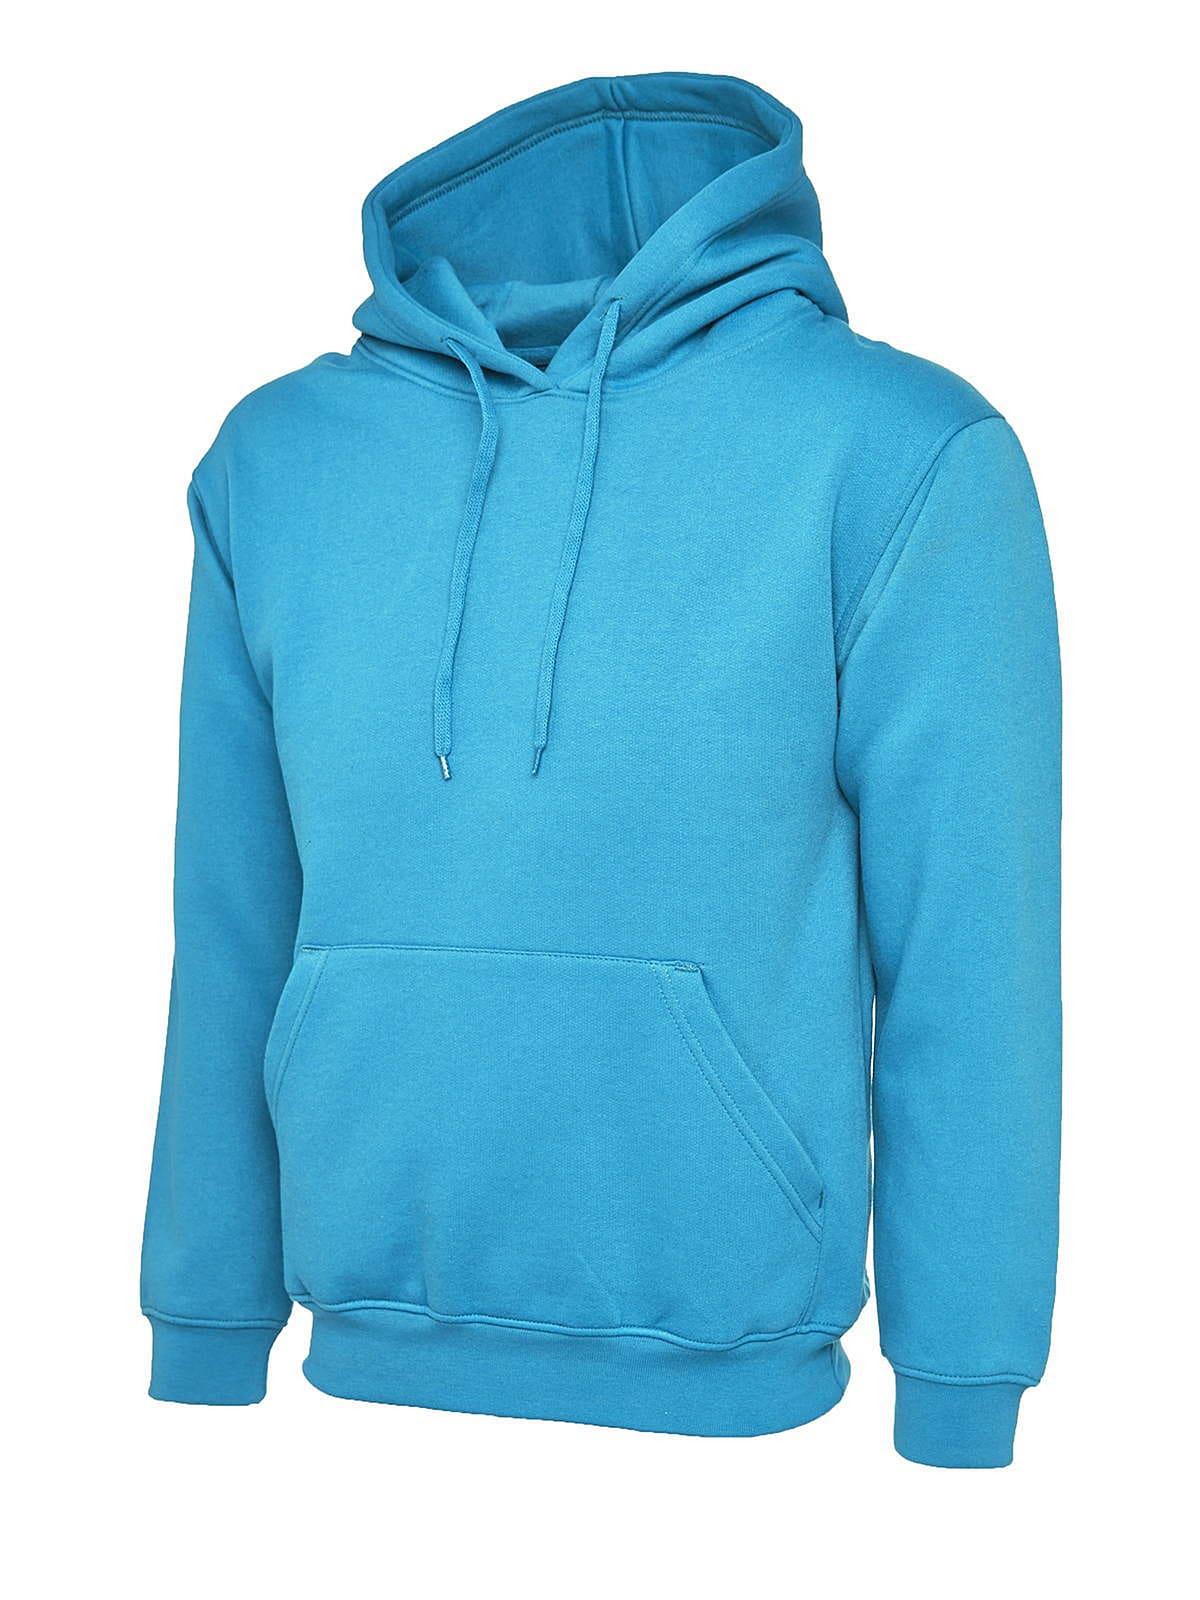 Uneek 300GSM Classic Hoodie in Sapphire Blue (Product Code: UC502)